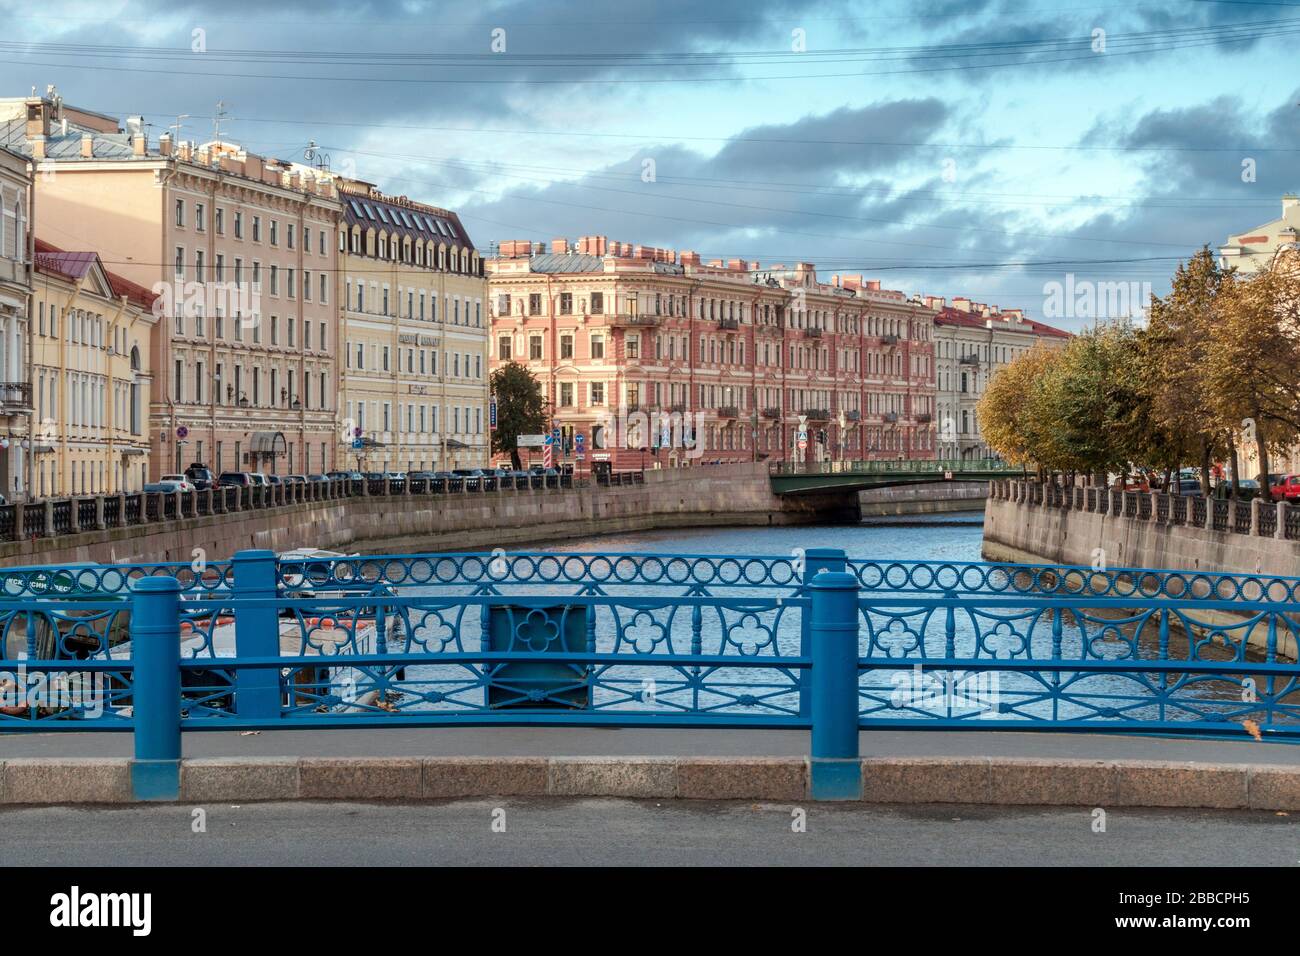 View from the Blue Bridge of the Moyka river and buildings on the embankment, St Petersburg, Russia Stock Photo